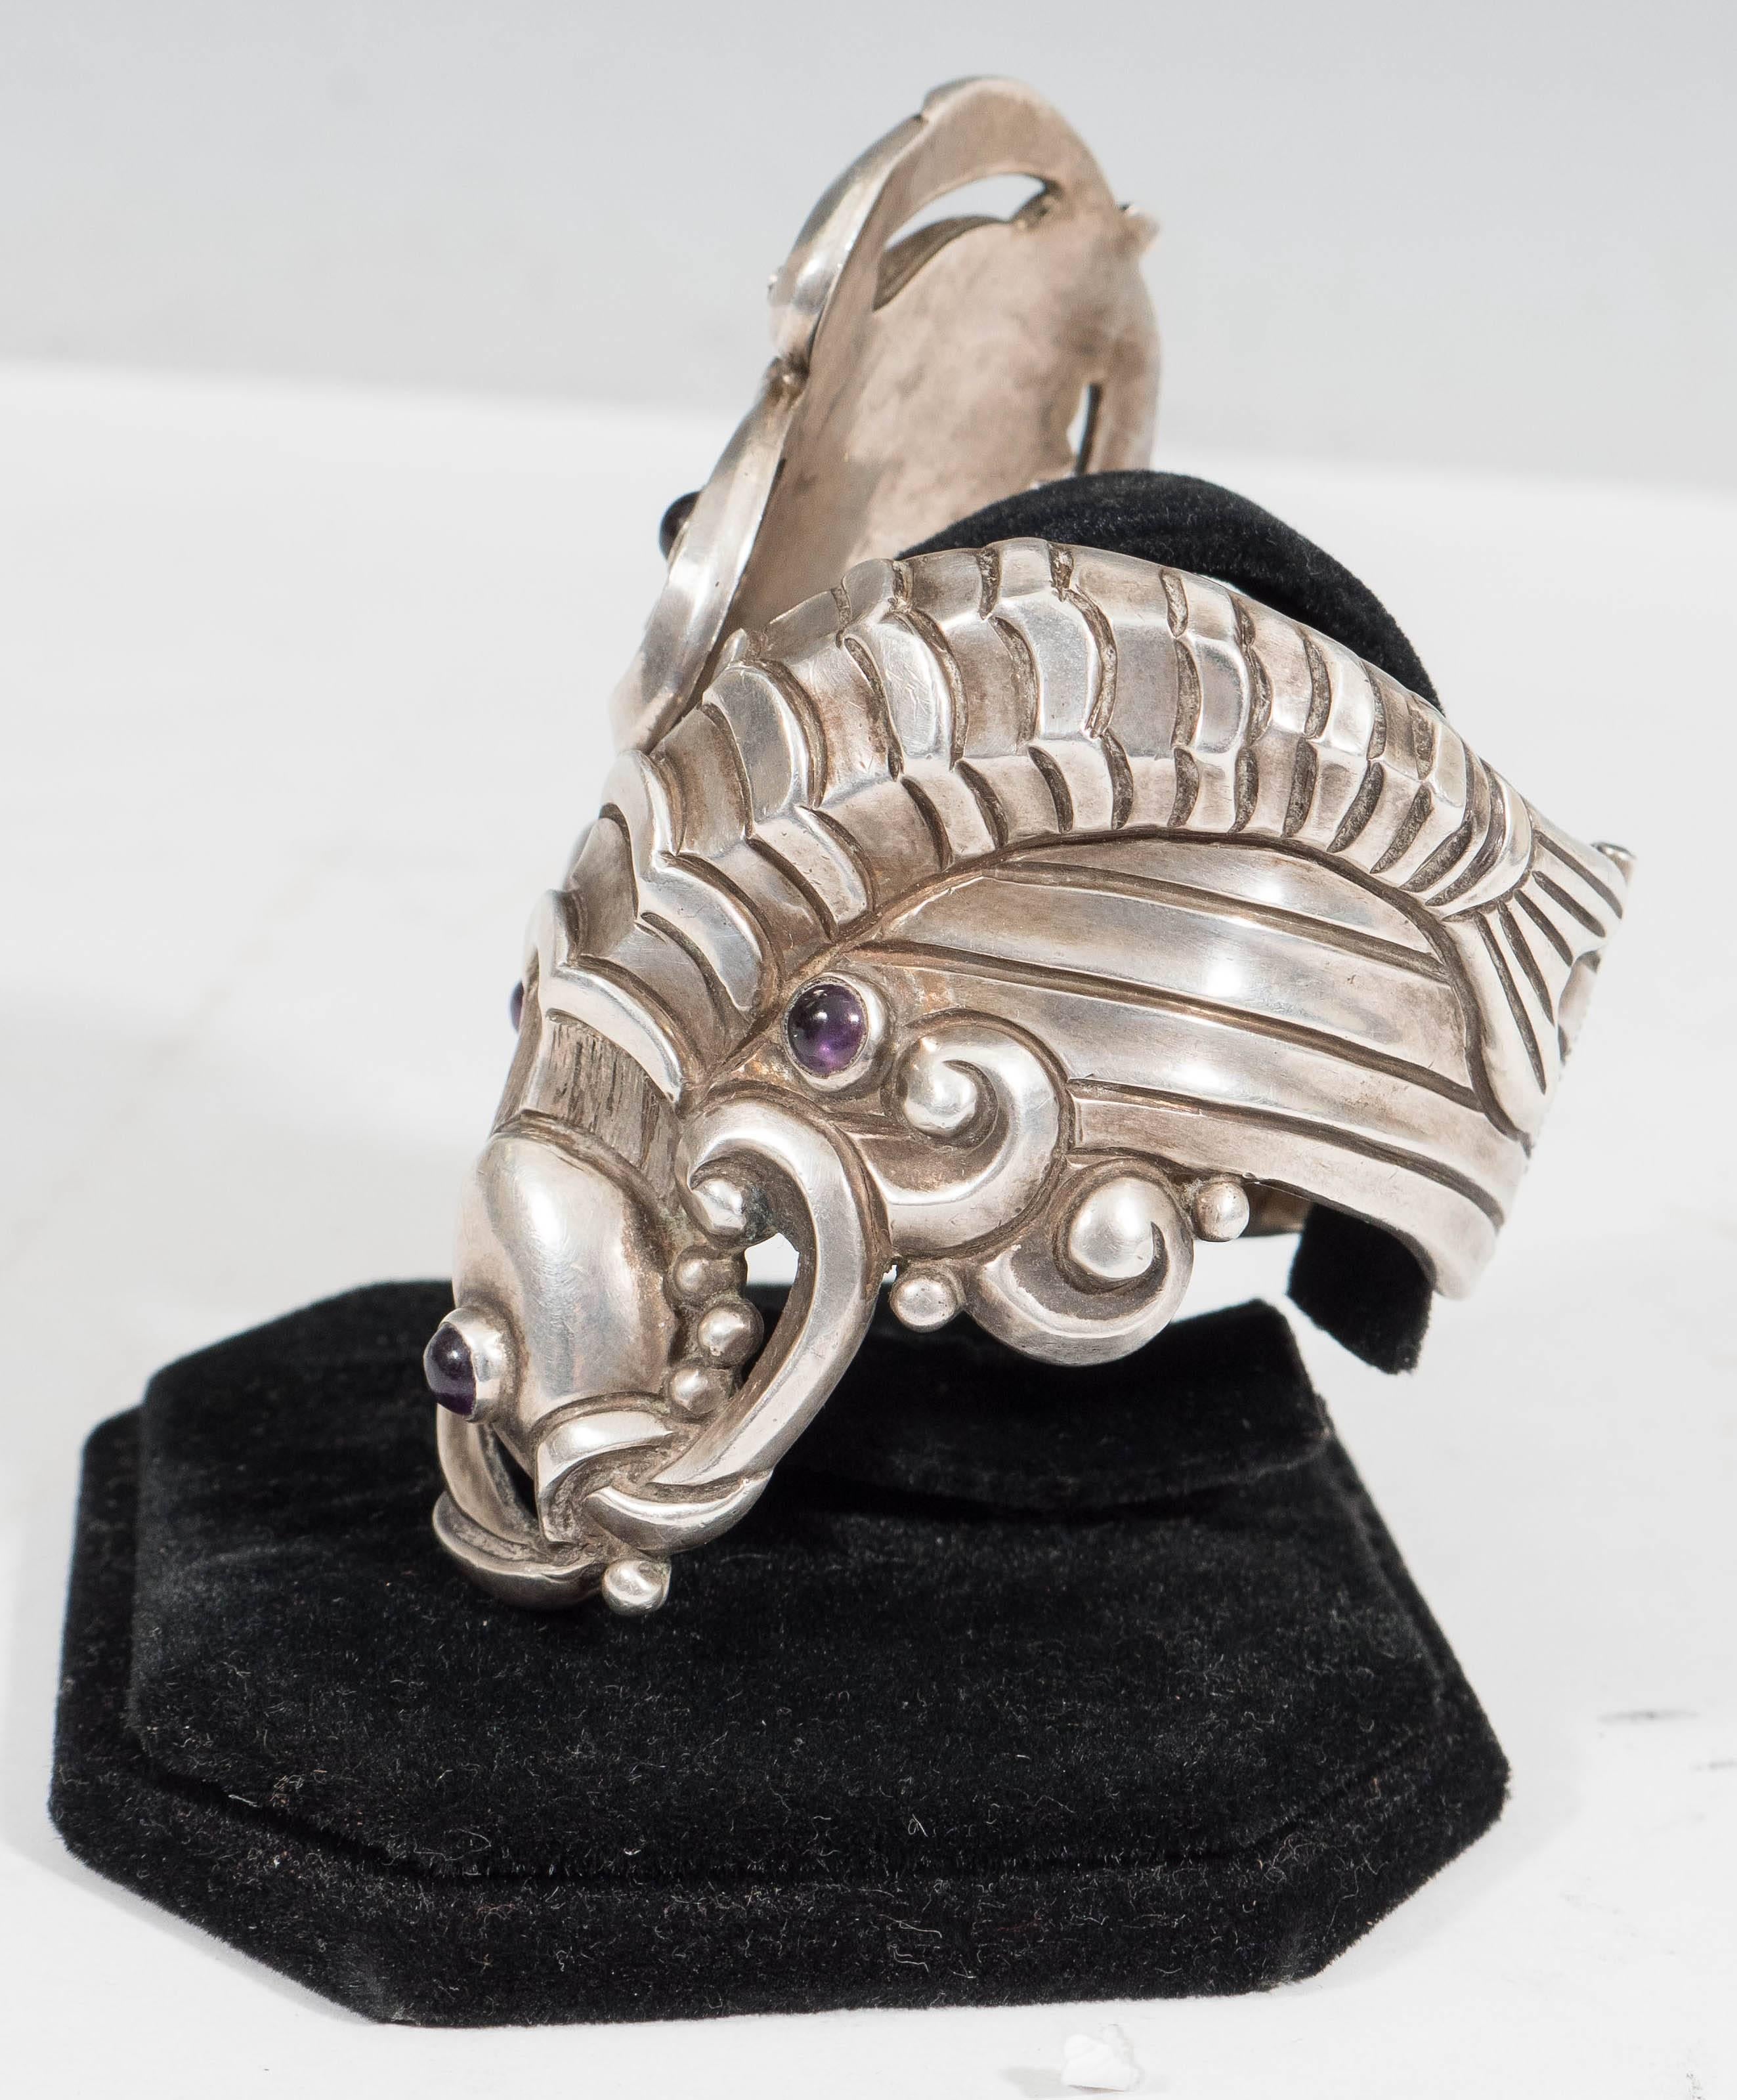 This vintage sterling silver clamper bracelet, produced in Mexico, circa 1940s by Margot van Voorhies Carr (otherwise 'Margot De Taxco'), features two Japanese inspired repousse koi fish, detailed with cabochon amethyst stones as their eyes and